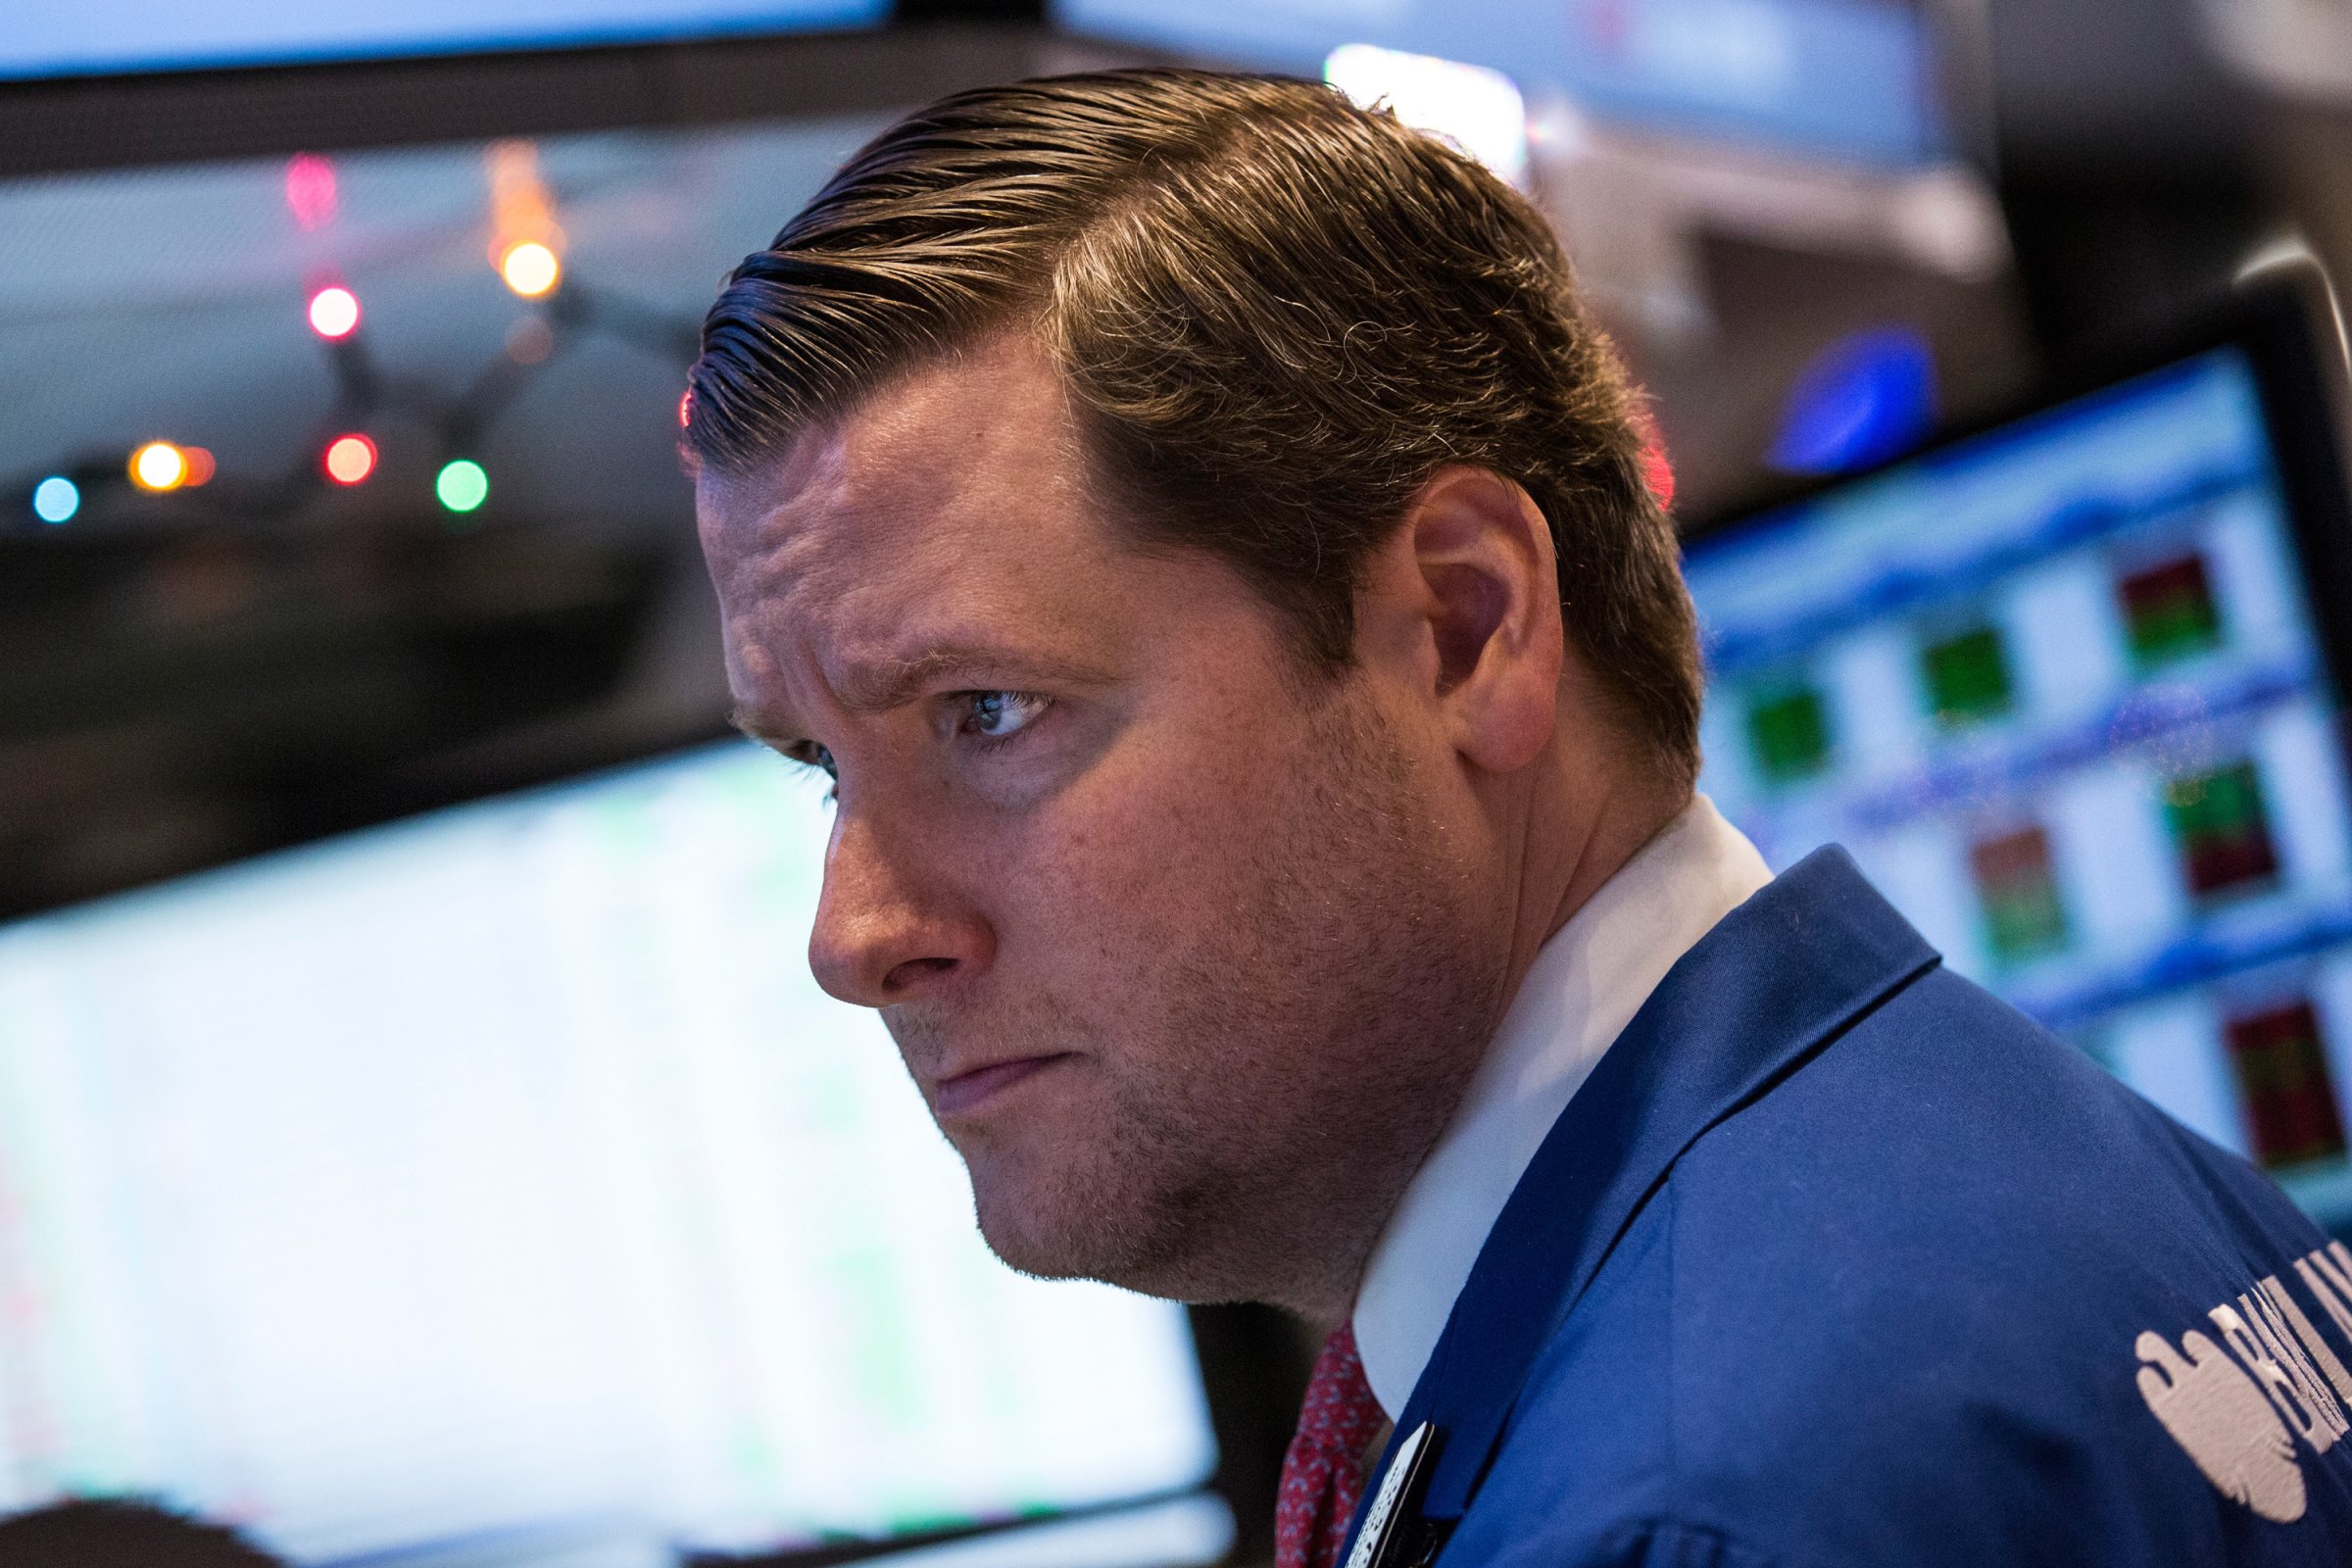 A trader on the floor of the New York Stock Exchange on Dec. 22, 2014.